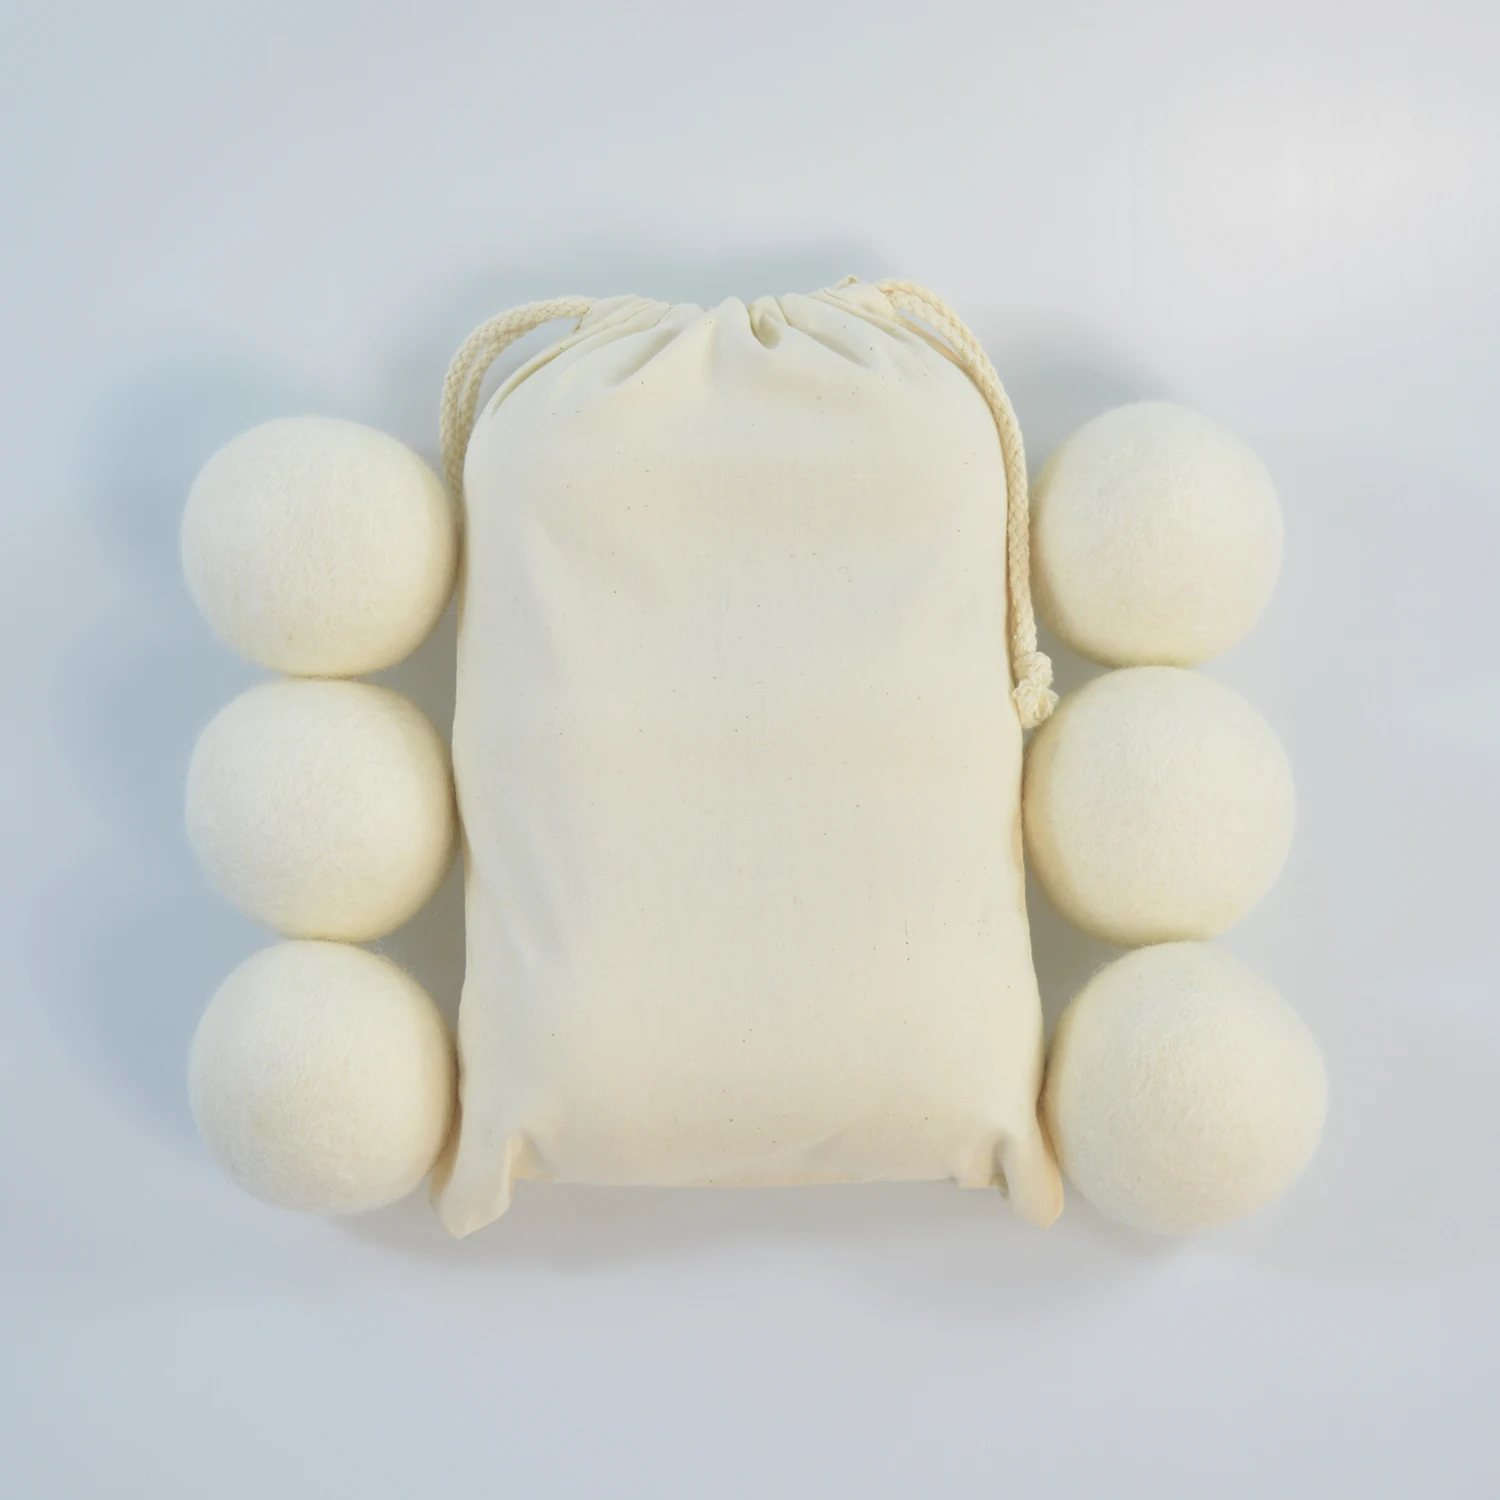 wholesale white new zealand sheep laundry wool drying ball for drying set (1600426705247)